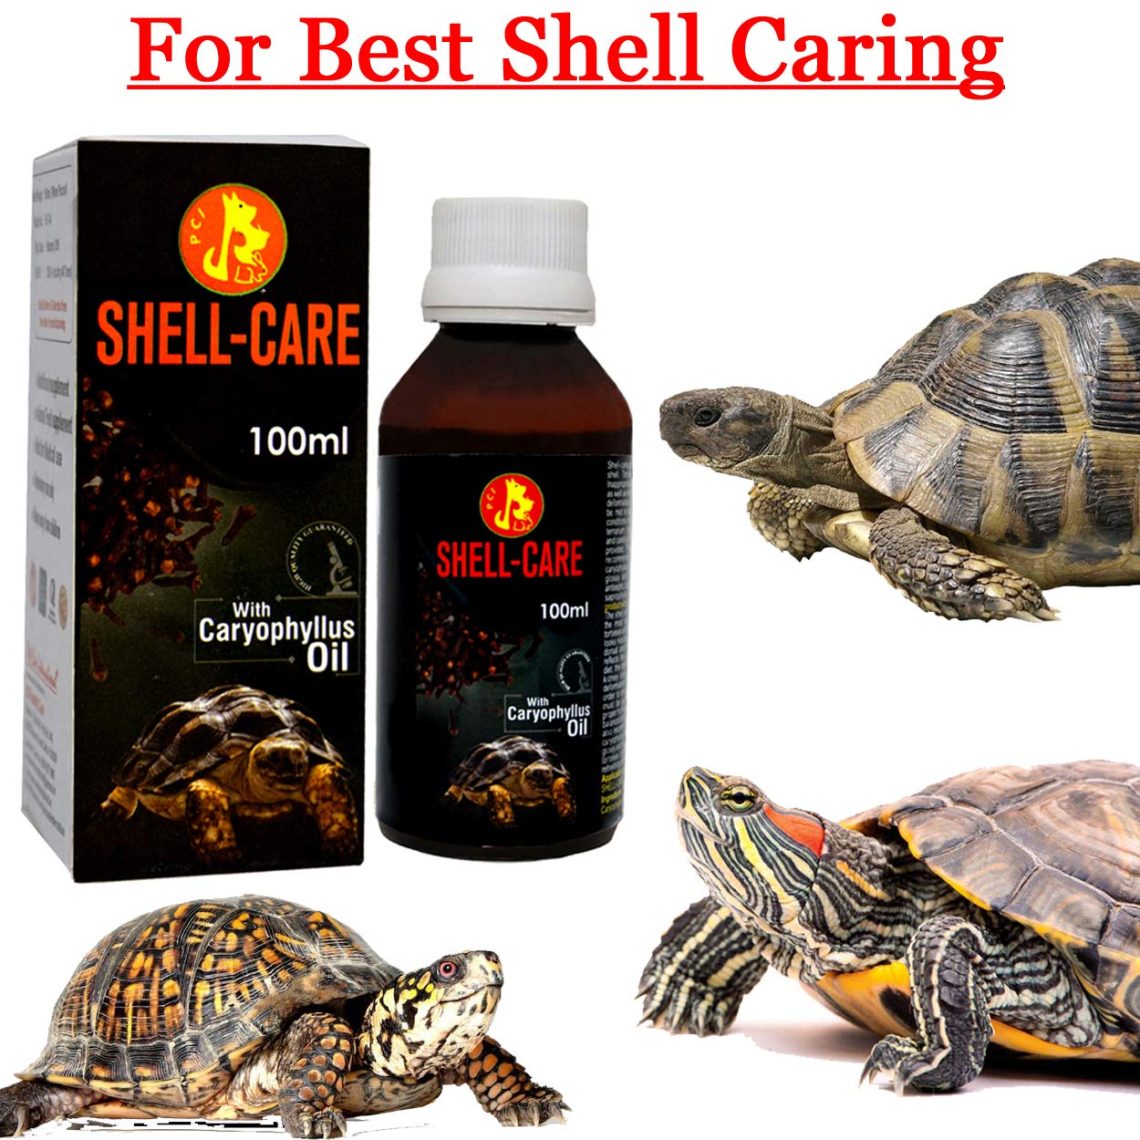 Turtle shell care